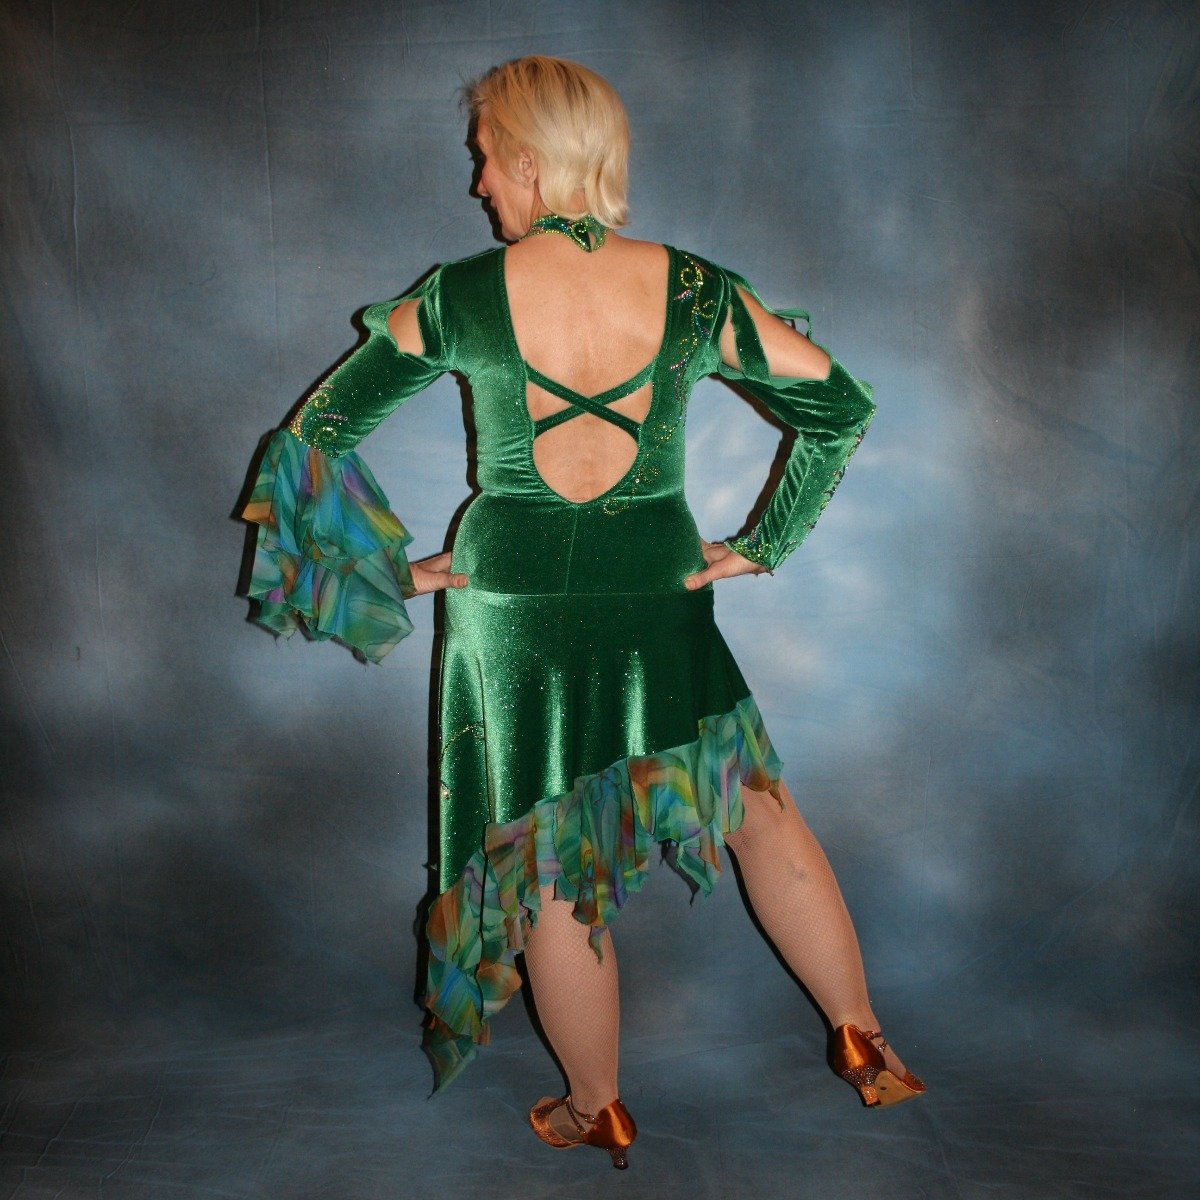 Crystal's Creations back view of Green Latin/rhythm dress was created in luxurious deep emerald green glitter stretch velvet with accent flounces of a green,purple, bronze & orchid  print chiffon. It features nude illusion cutout through the bodice, & is embellished with detailed Swarovski rhinestone work of peridot, emerald & orchid.